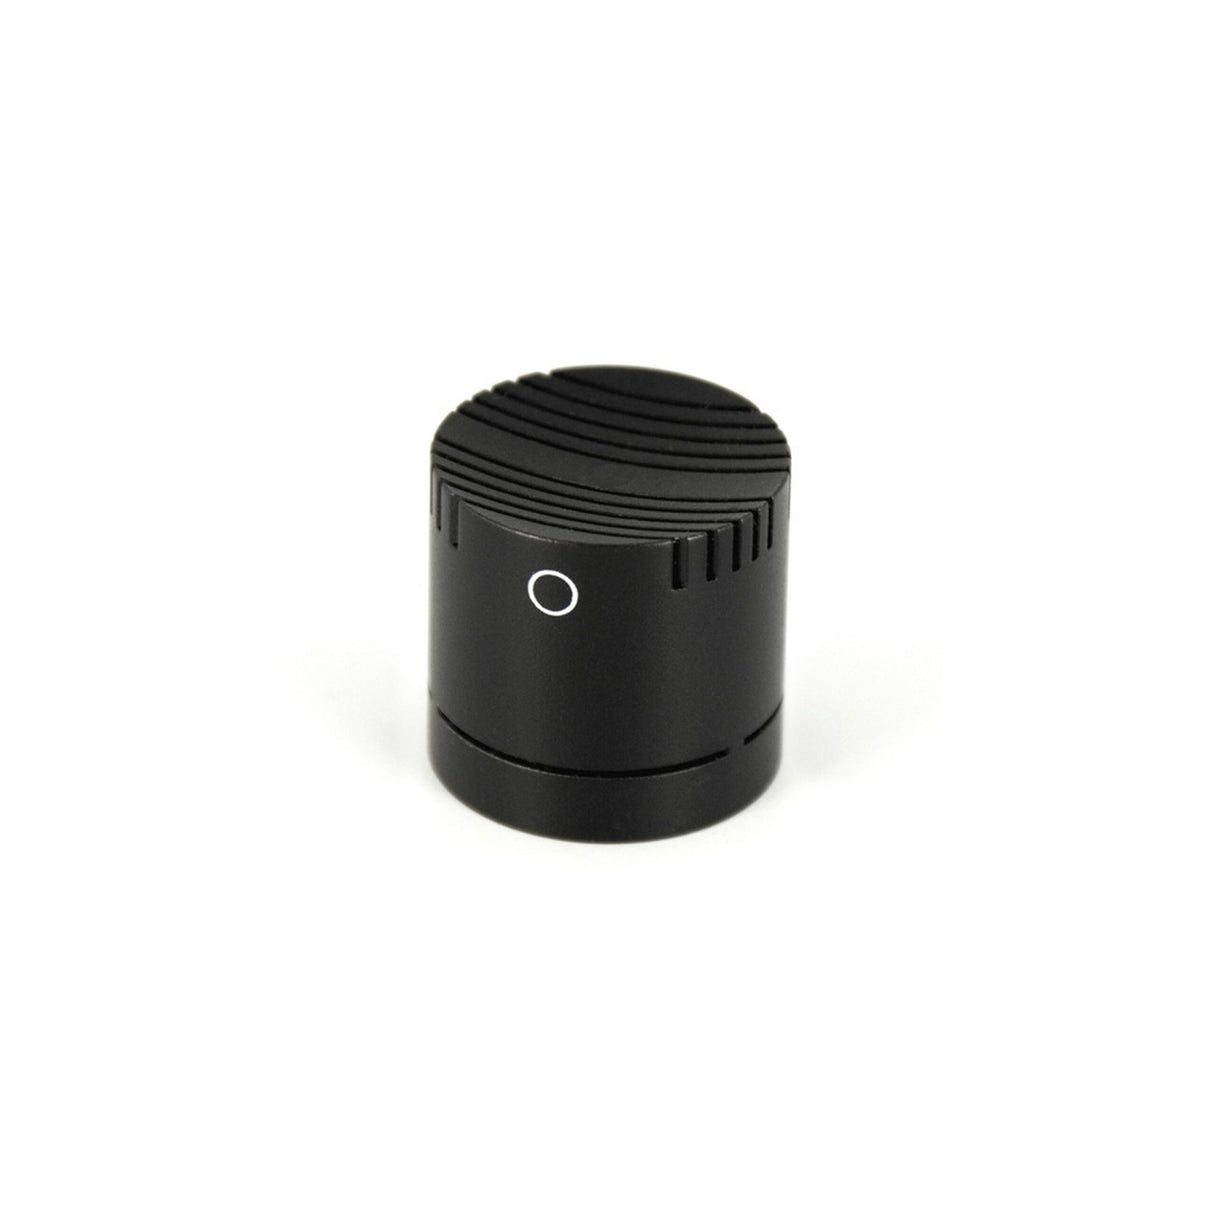 Milab VM-44 Replacement Omni Capsule for VM-44